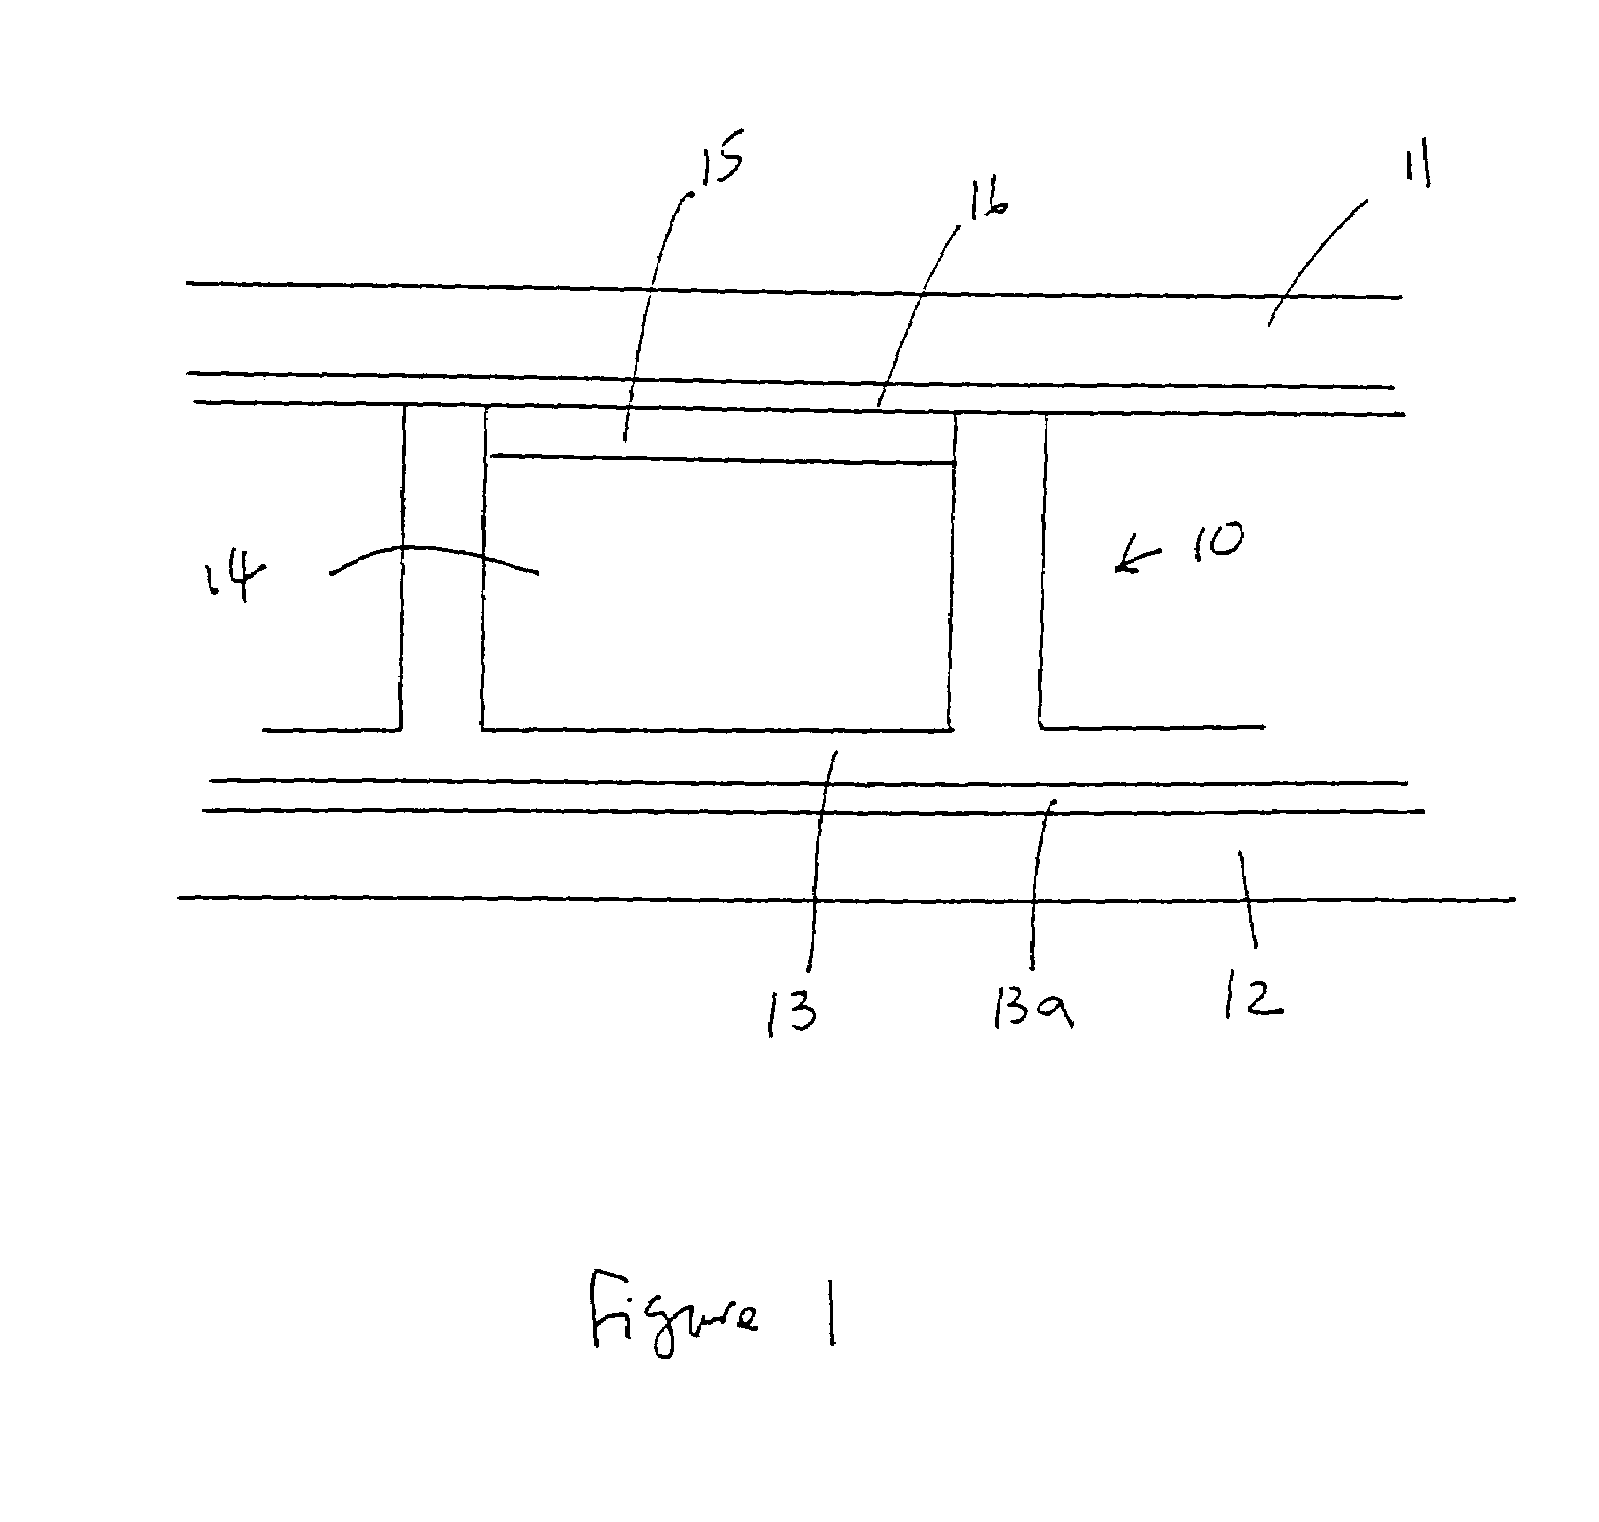 Electrochromic or electrodeposition display and novel process for their manufacture